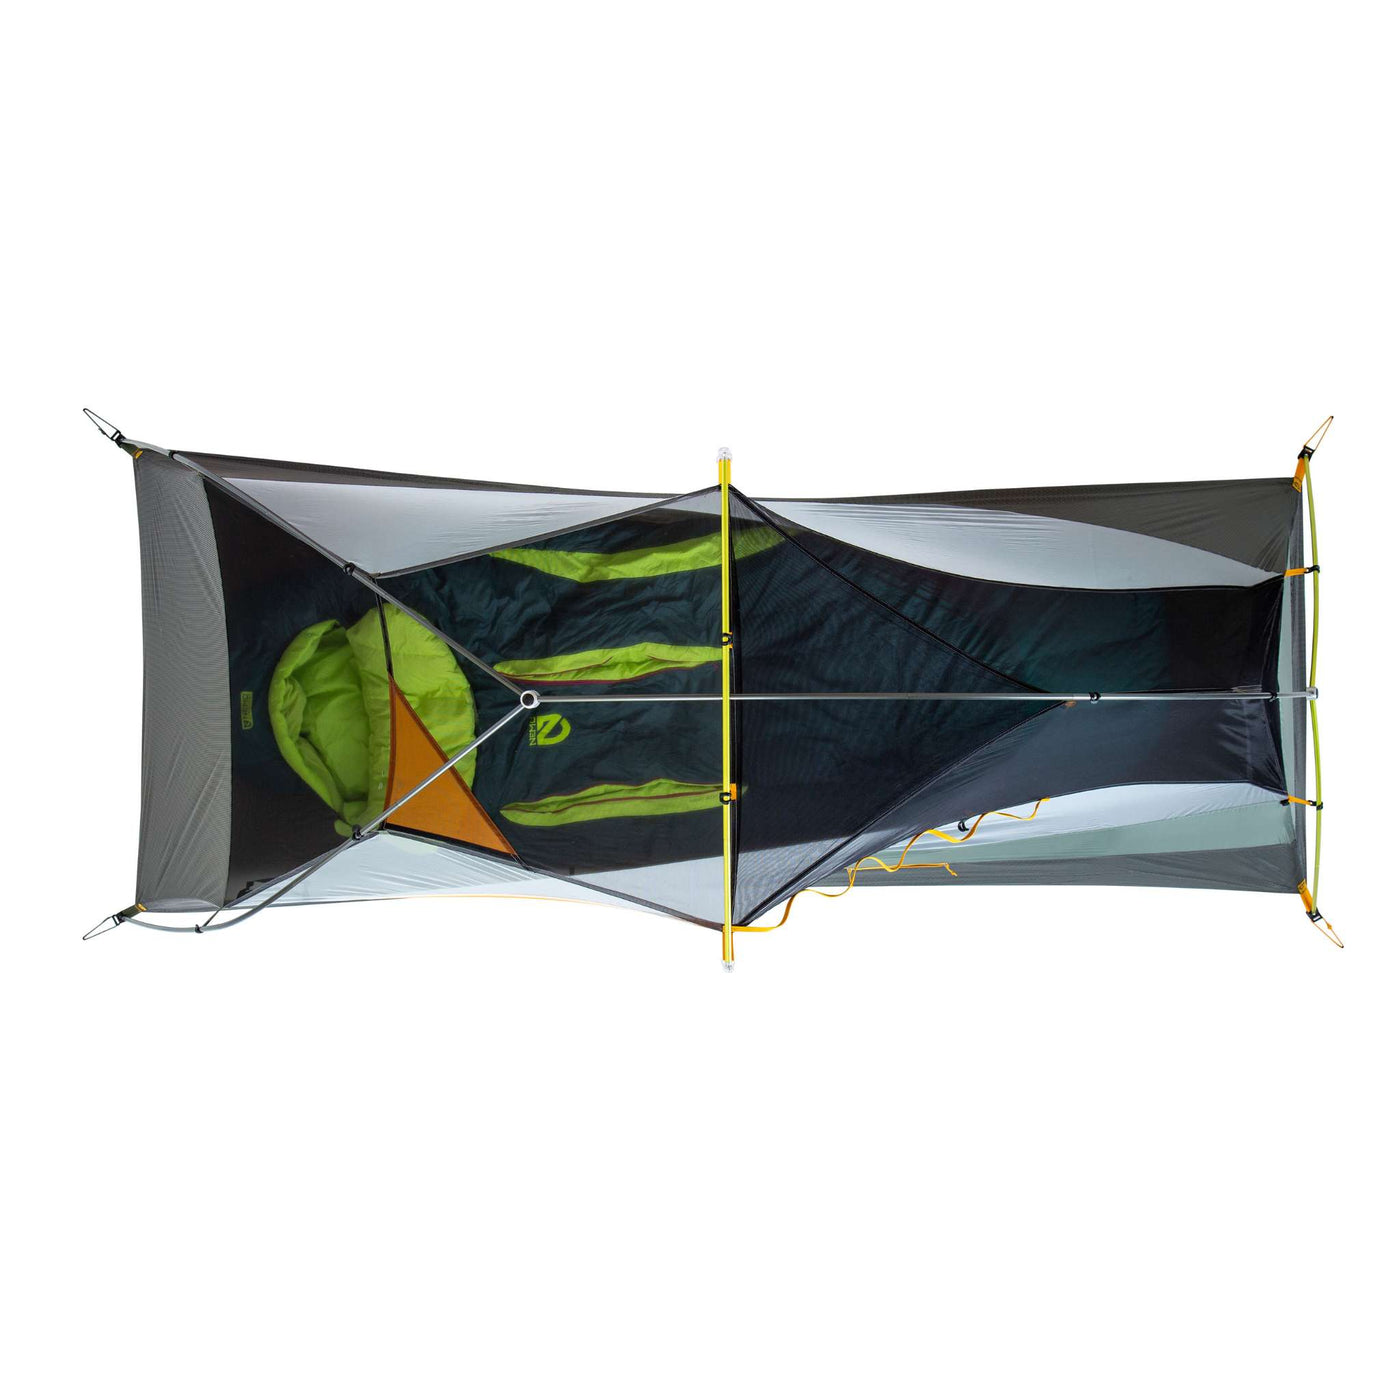 Nemo Dragonfly Bikepack 1 Person Tent | One Person Bikepacking Tent | Further Faster Christchurch NZ